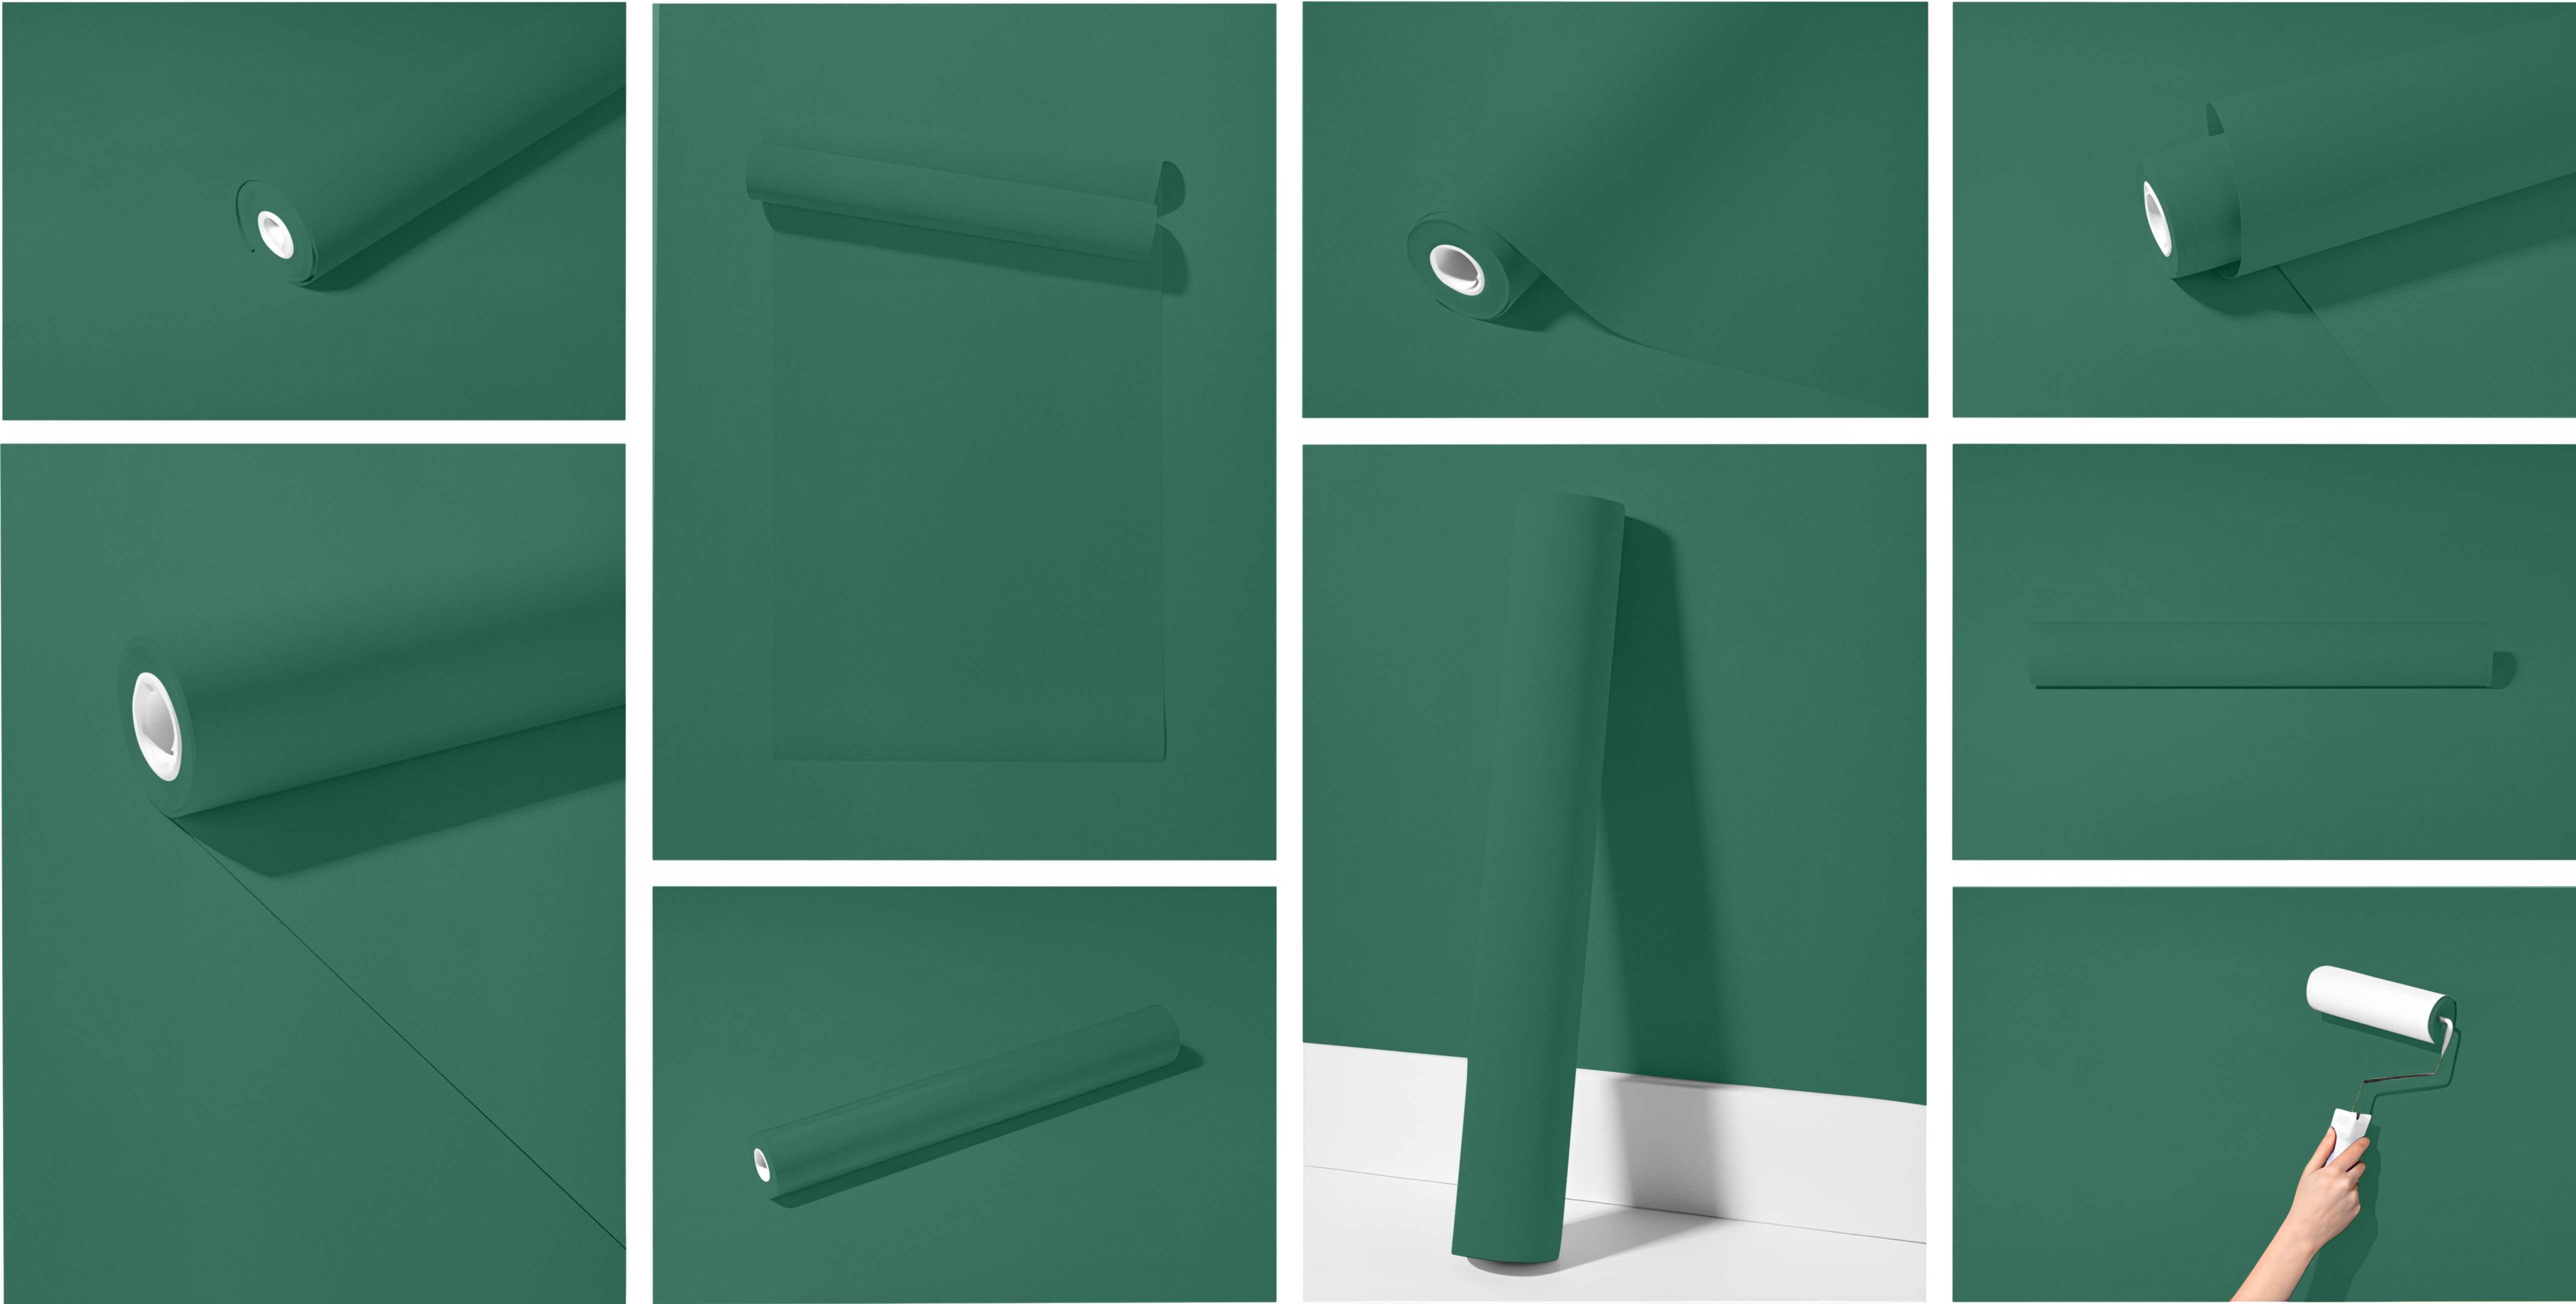 Peel & Stick Removable Re-usable Paint - Color RAL 6000 Patina Green - offRAL™ - RALRAW LLC, USA